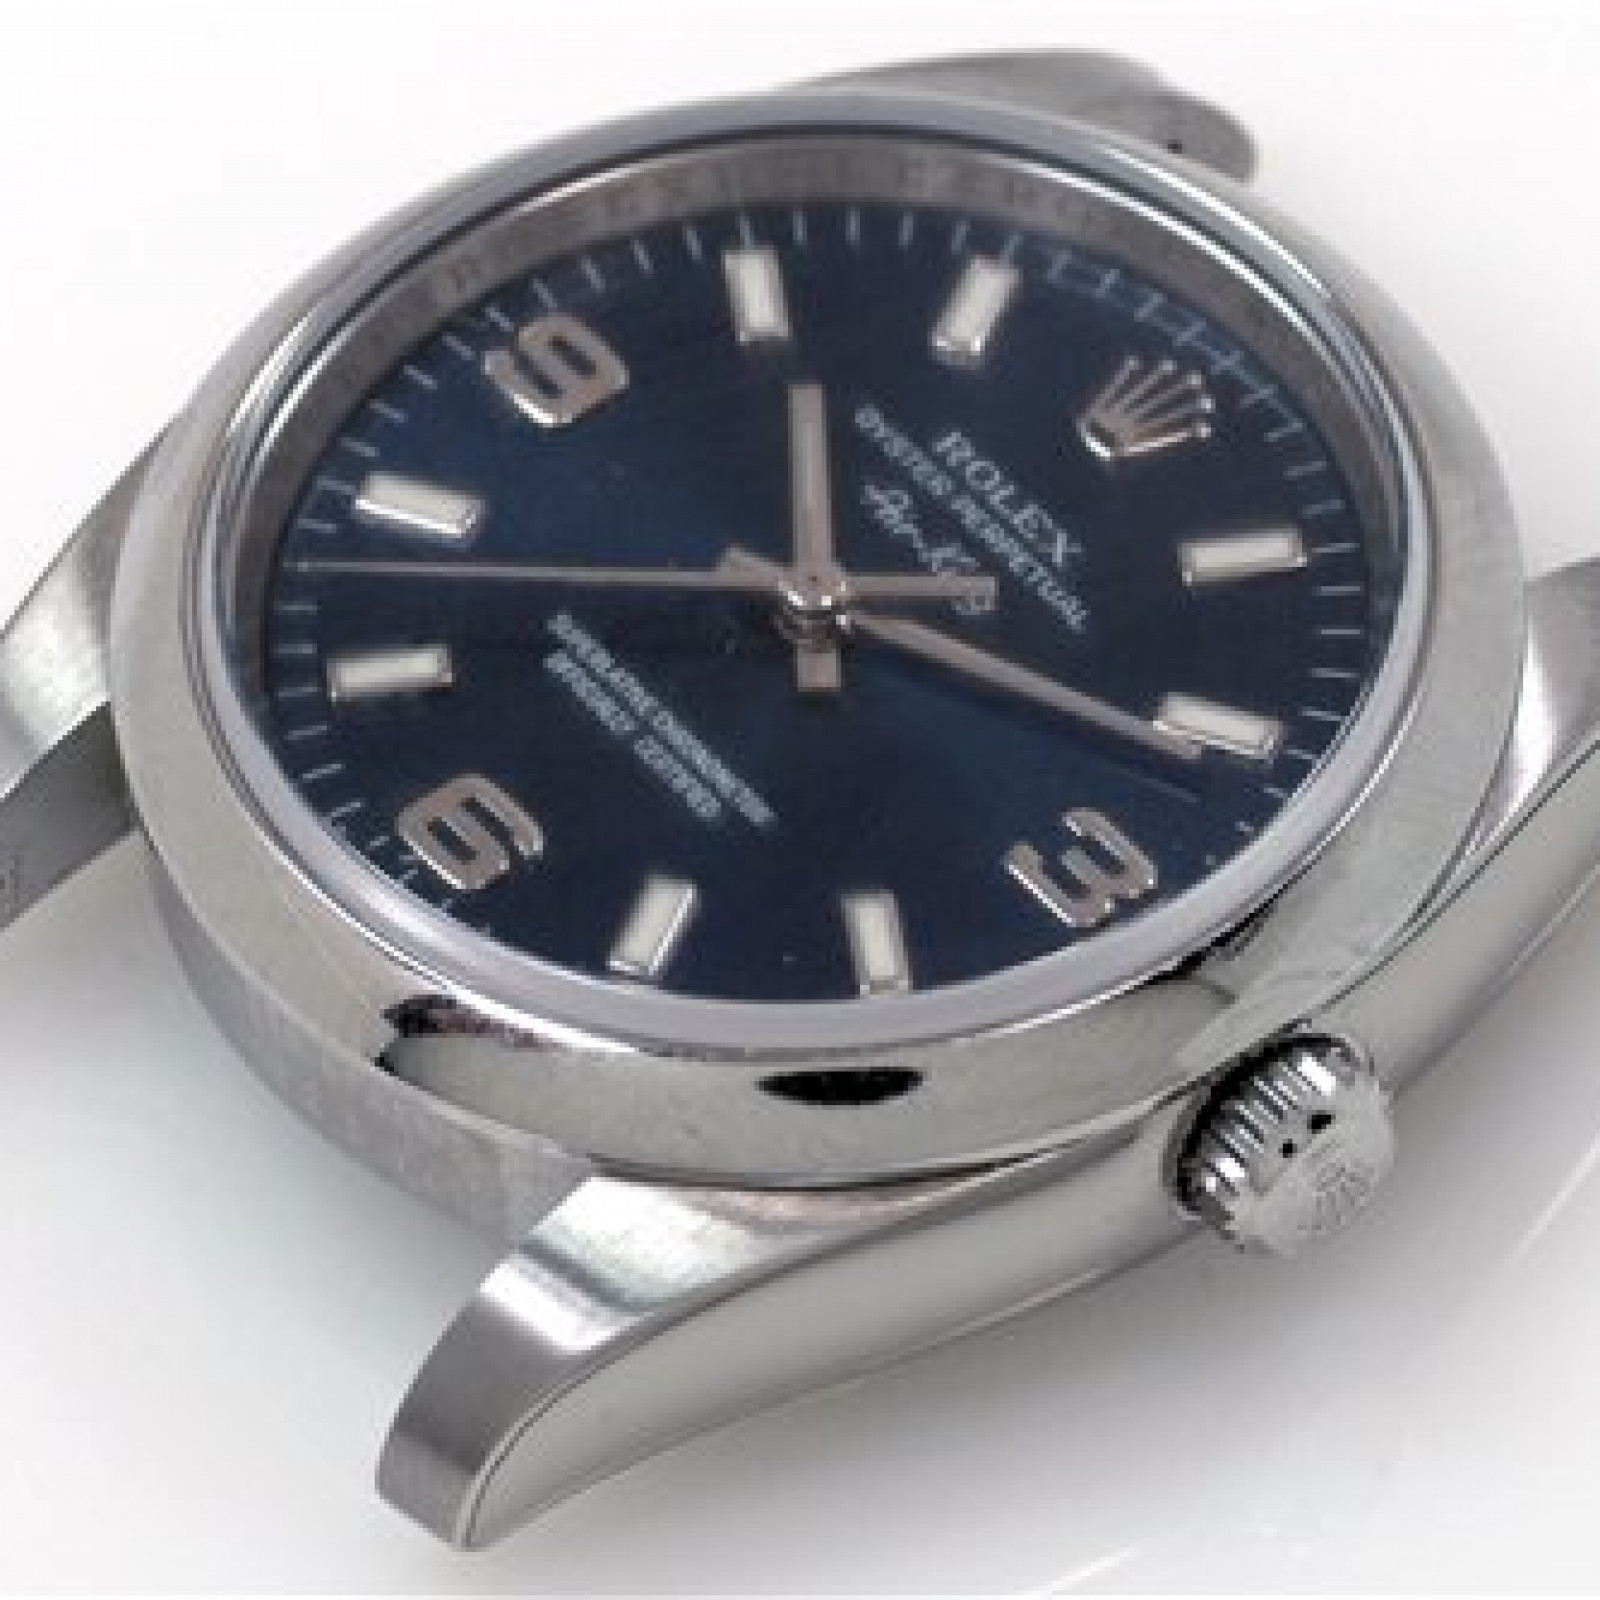 Rolex Air King 114200 Steel with Blue Dial Year 2010